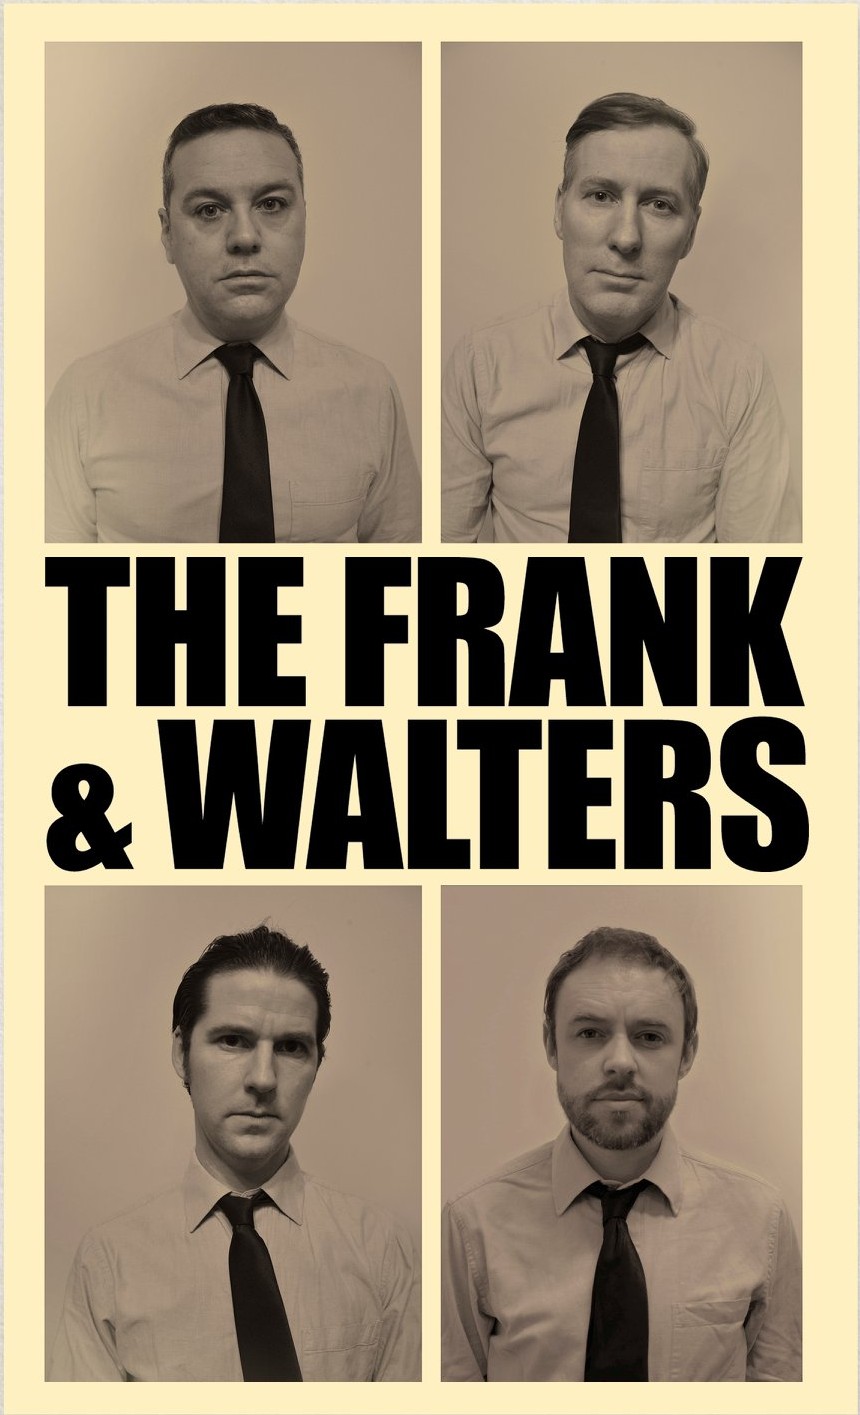 The Frank & Walters